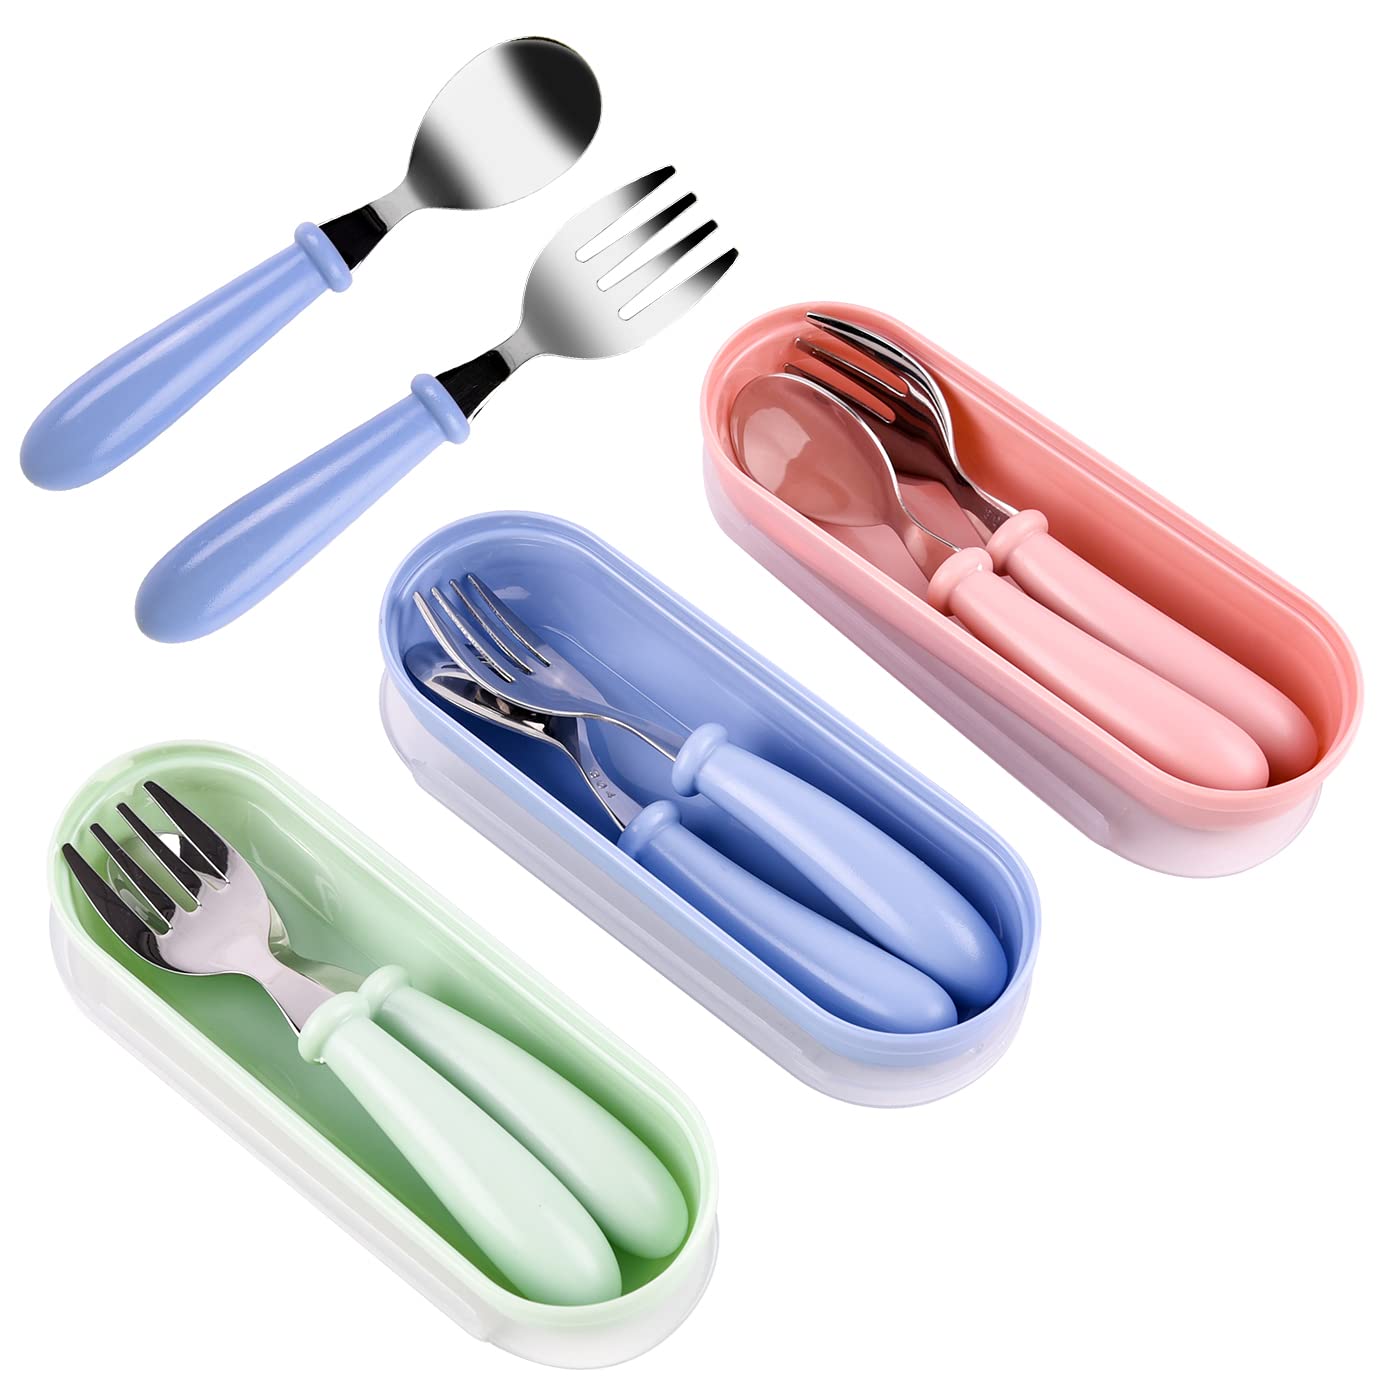 WXJ13 3 Toddler Fork and Spoon Sets,Toddler Cutlery Baby Cutlery Safe Baby Tableware Kids Feeding Cutlery Utensils Weaning Spoons with Travel Case Dishwasher Safe for Kids